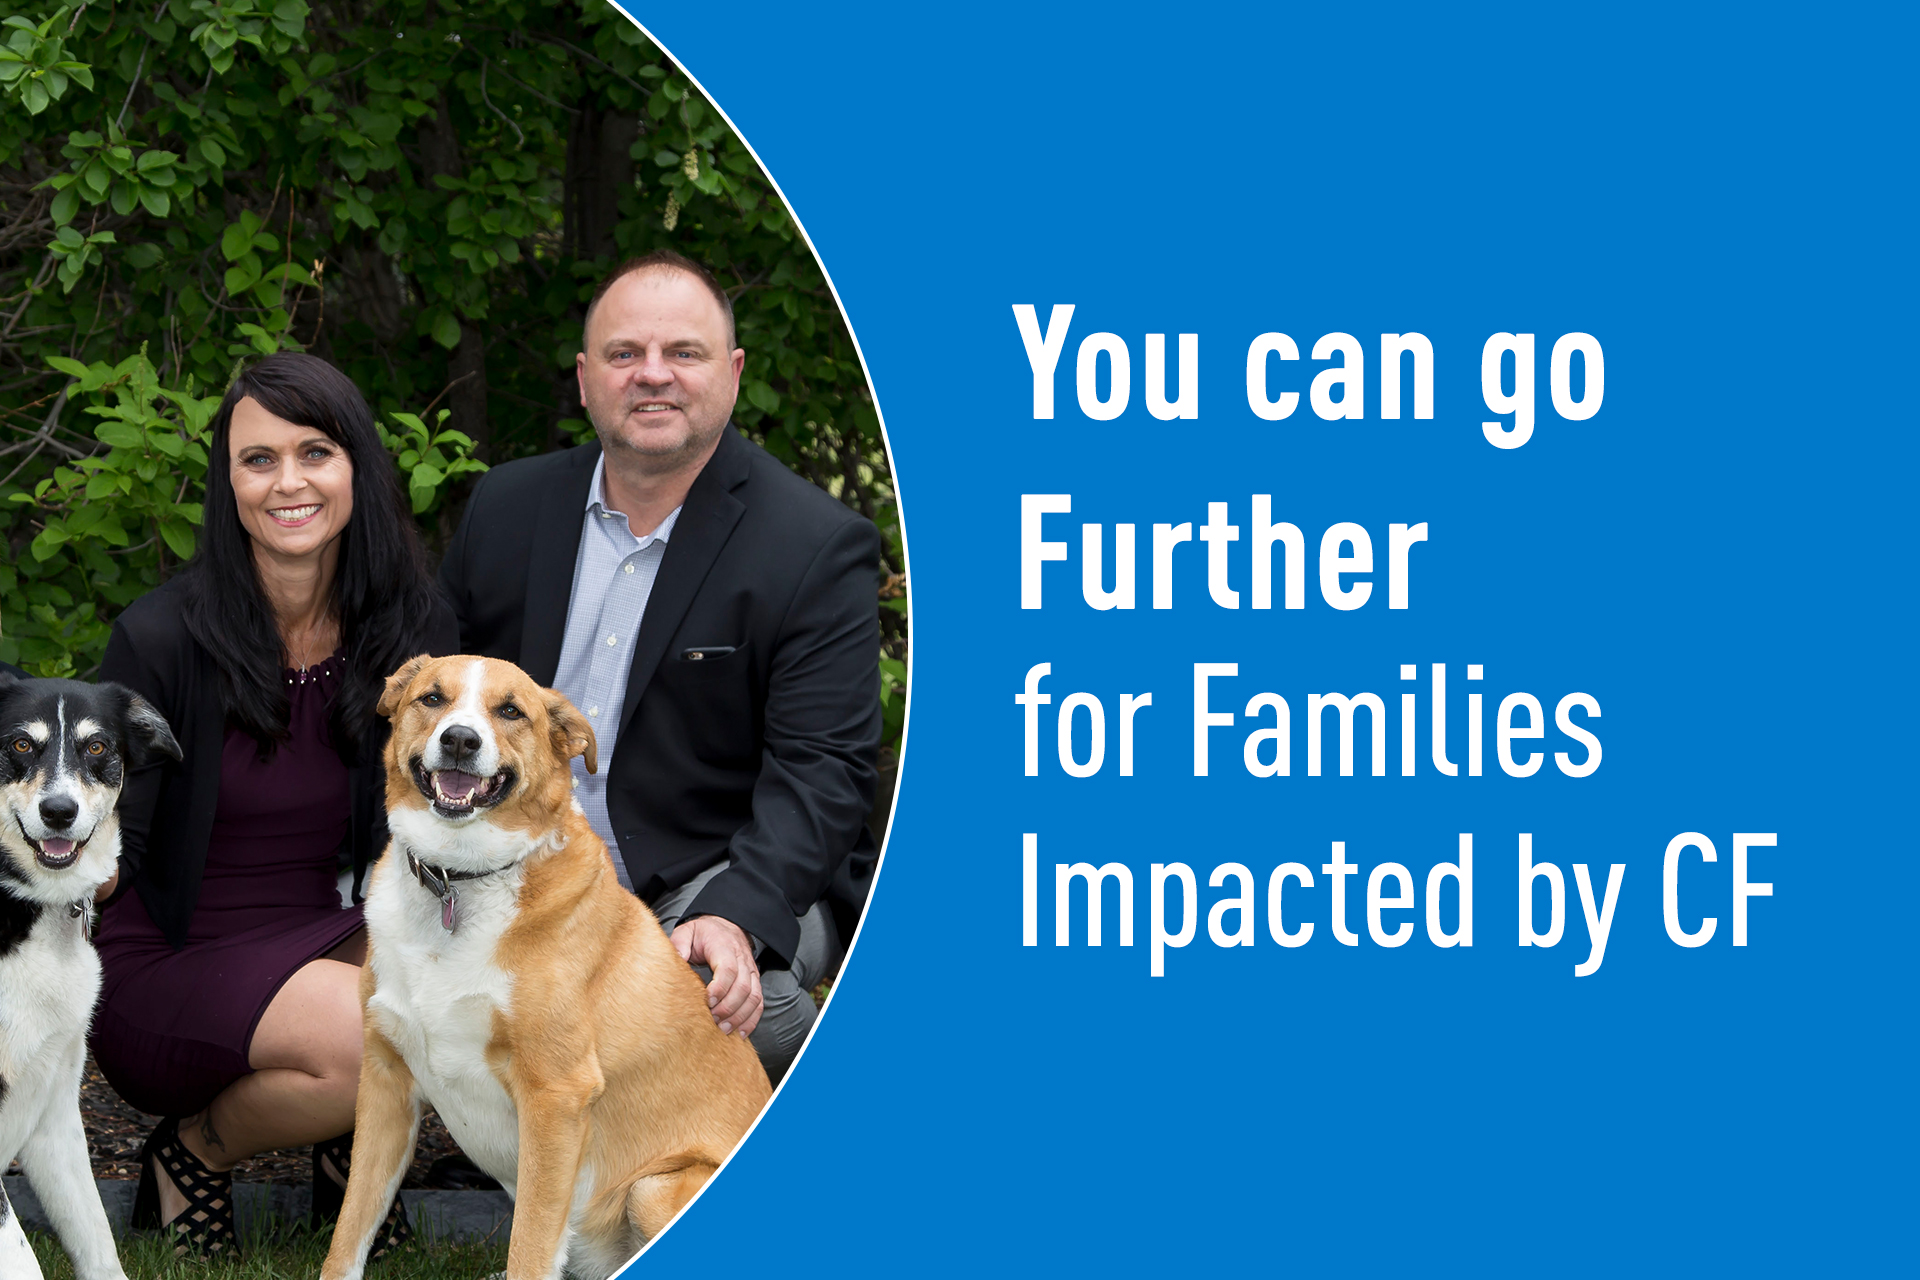 You can go further for families impacted by CF